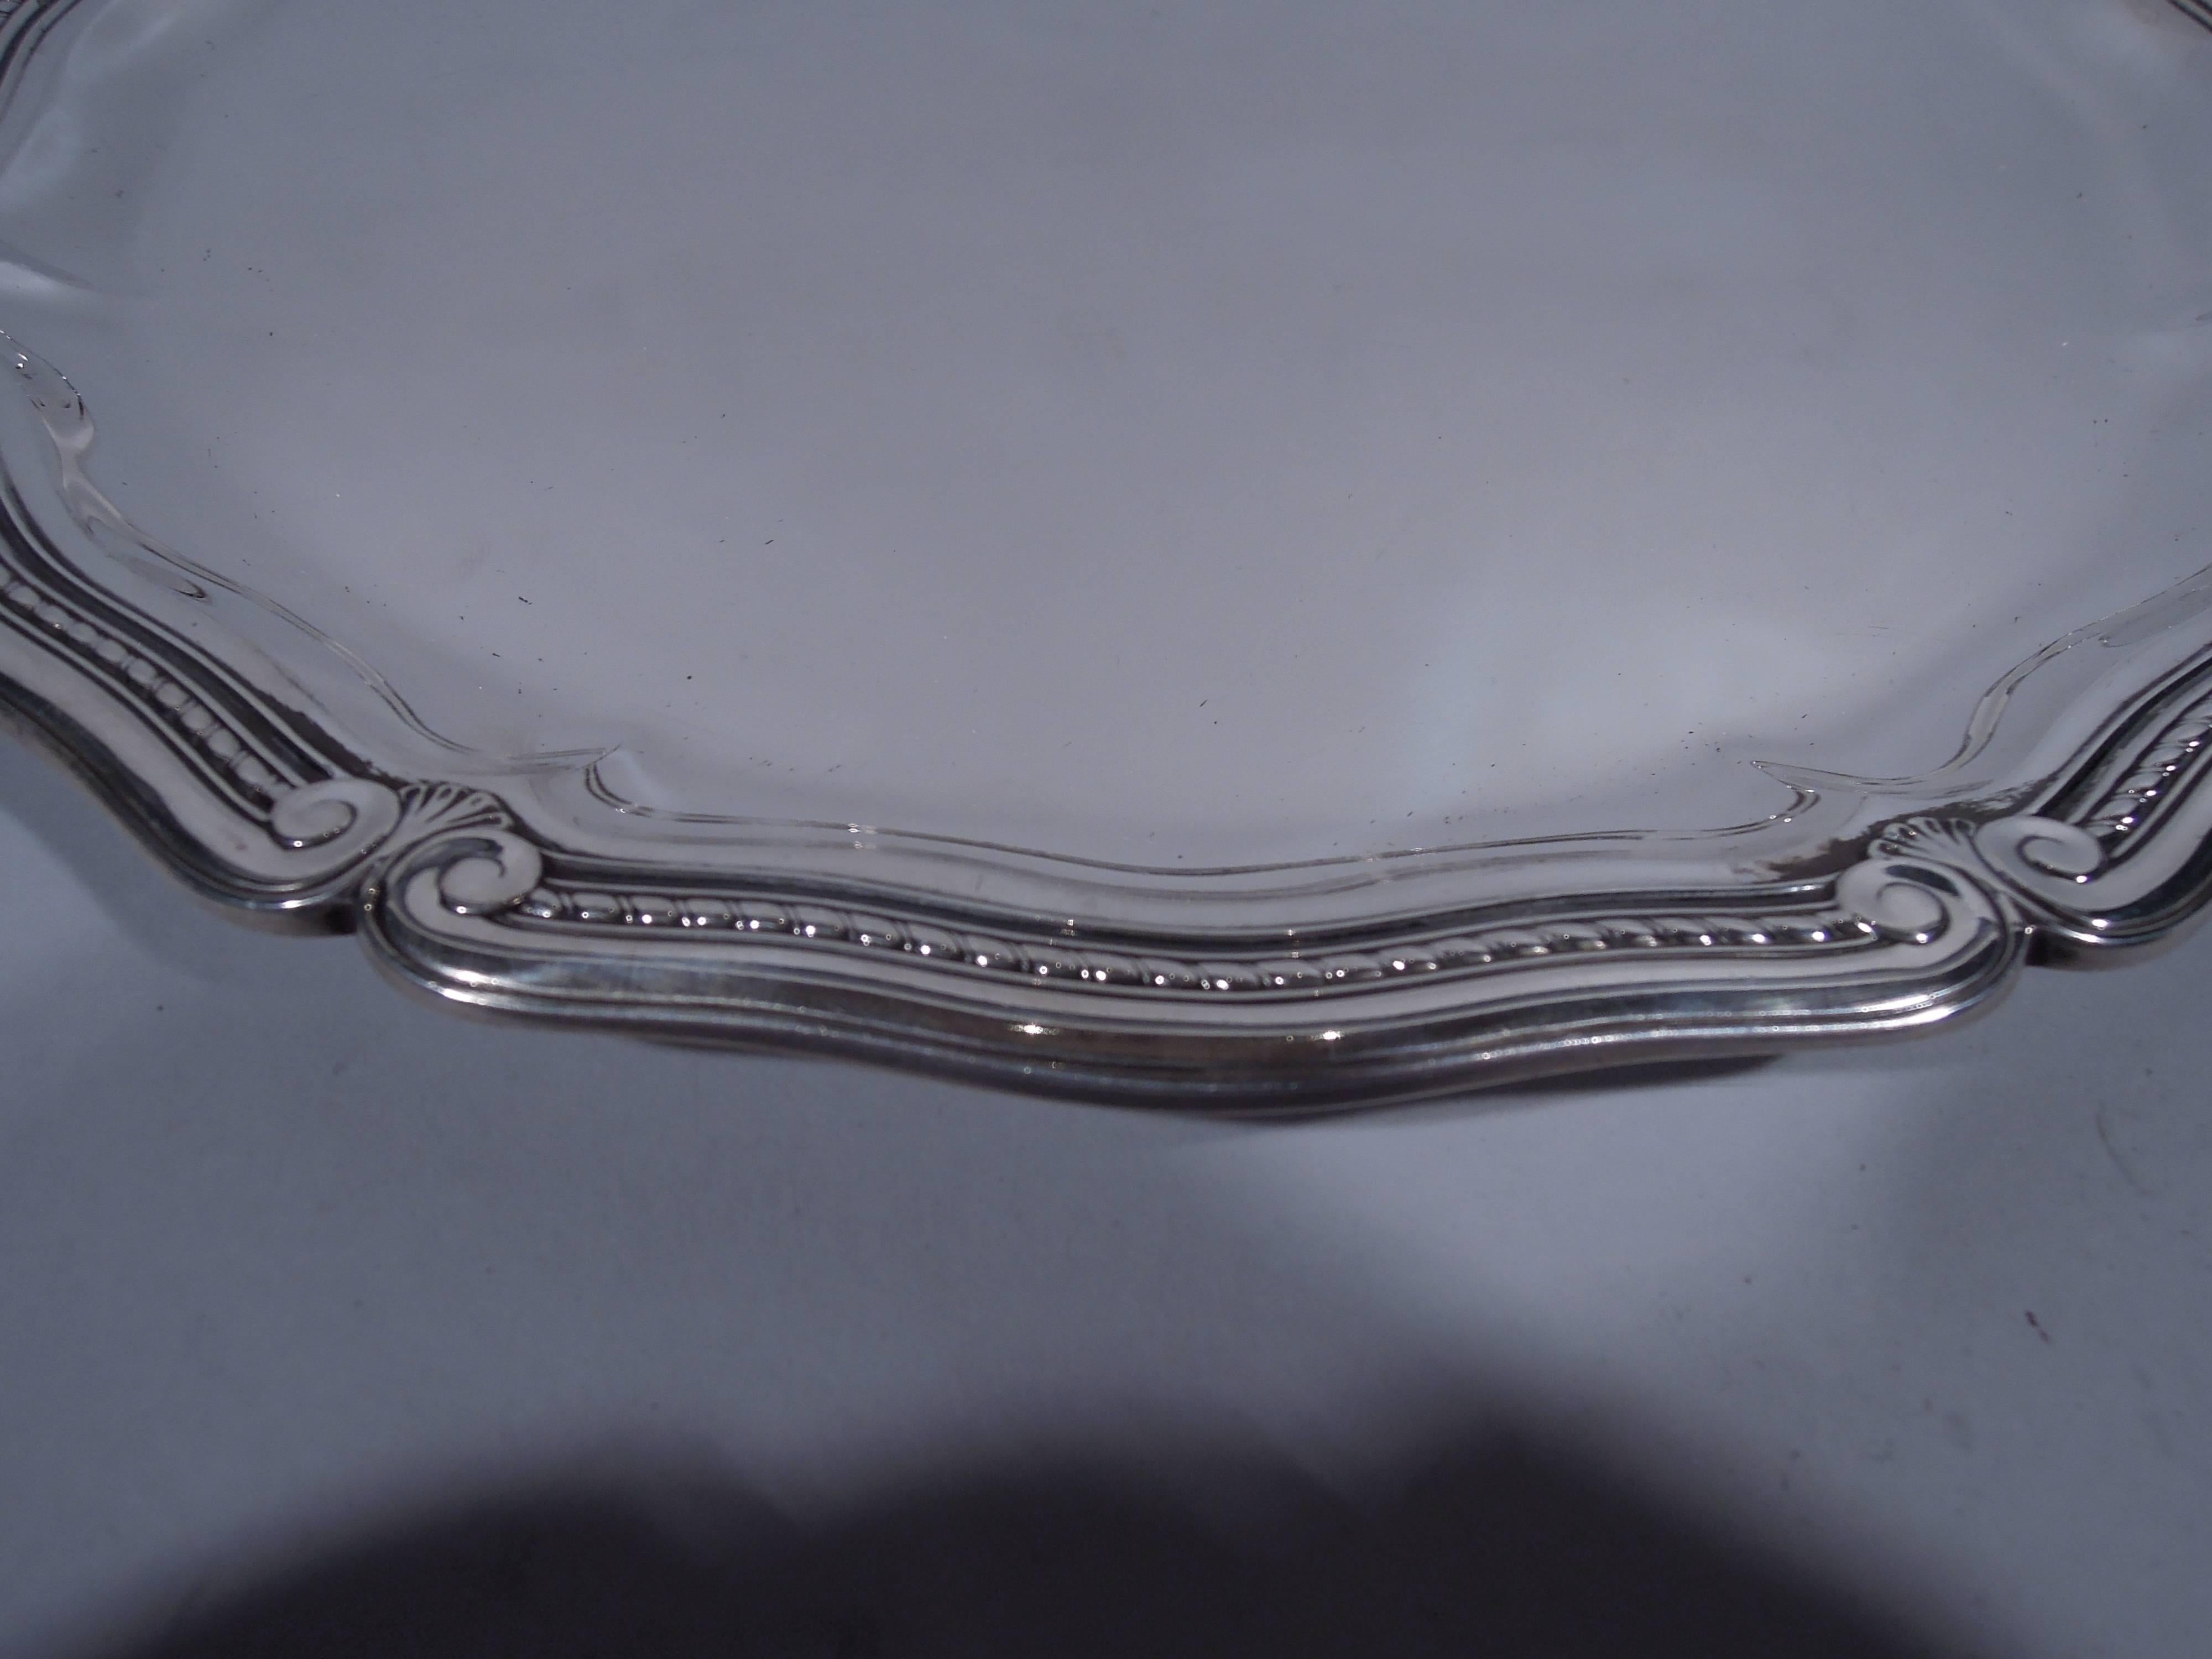 Sterling silver tray. Made by Tiffany & Co. in New York, circa 1911. Scrolled well bordered by flat scrolls with volute terminals, gadrooning and foliage. Classical motifs updated for modern tastes. The pattern (no. 18061) was first produced in